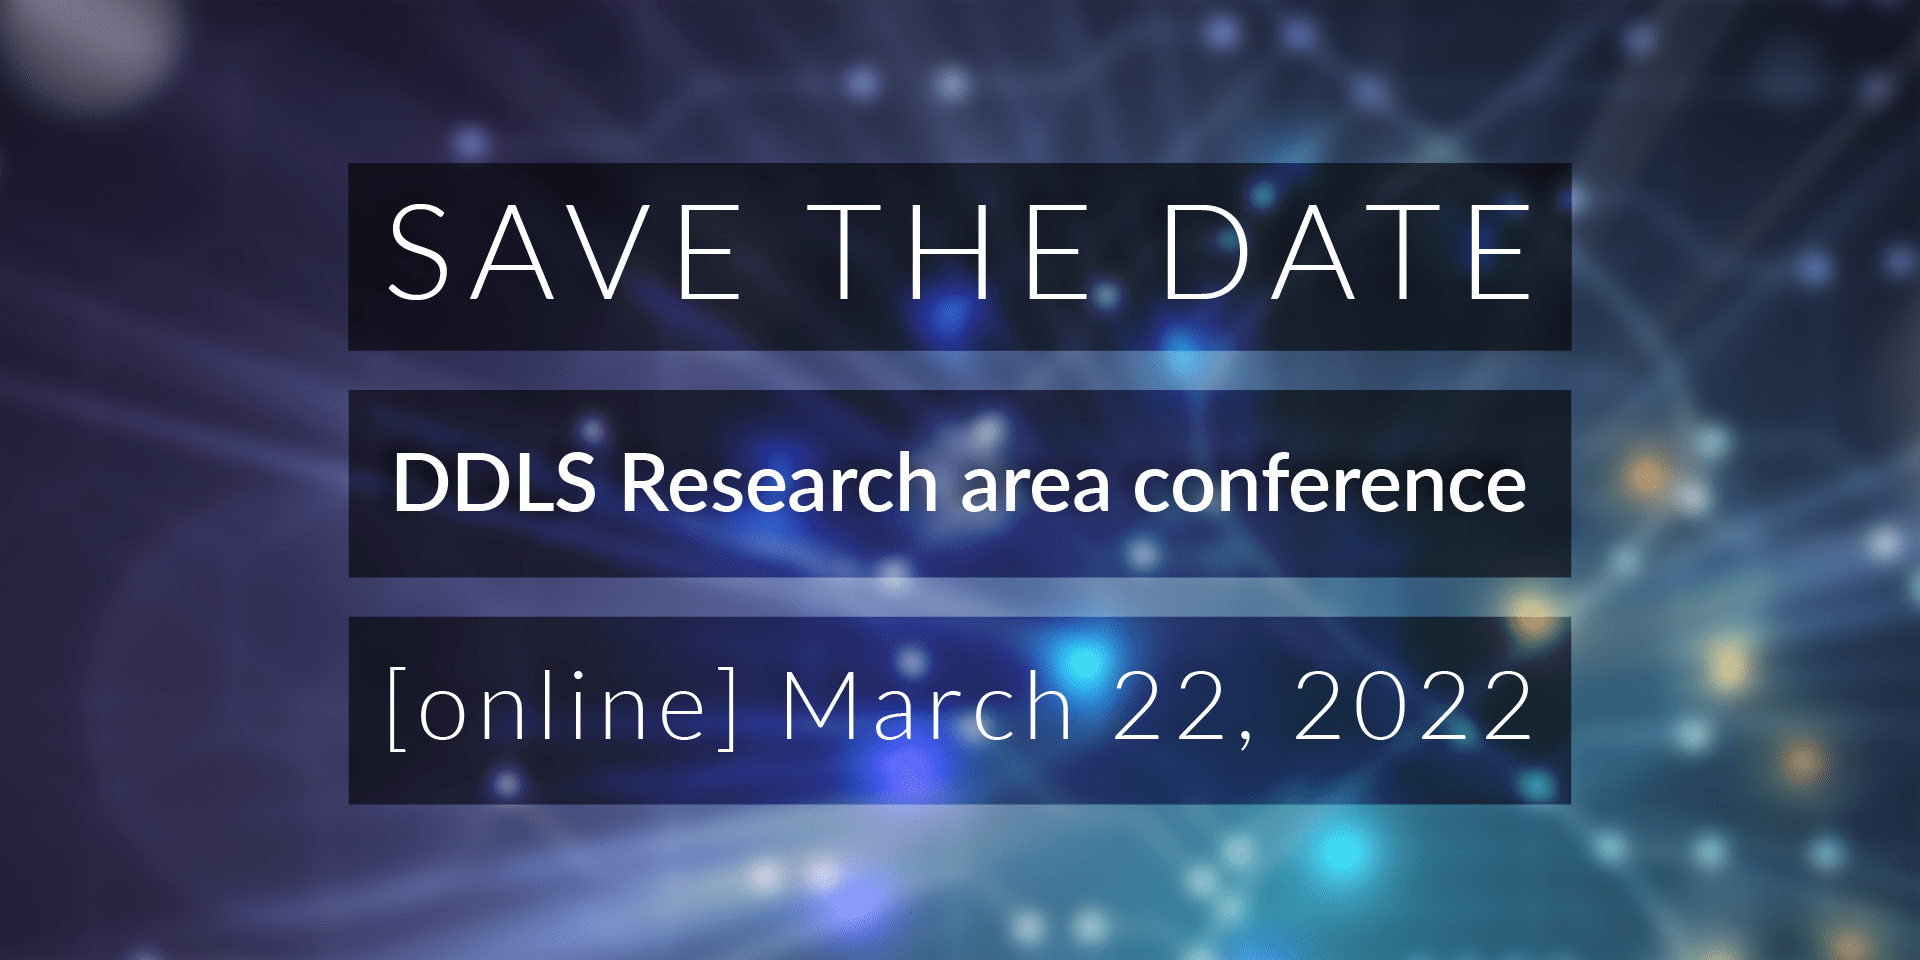 DDLS Research area conference save the date